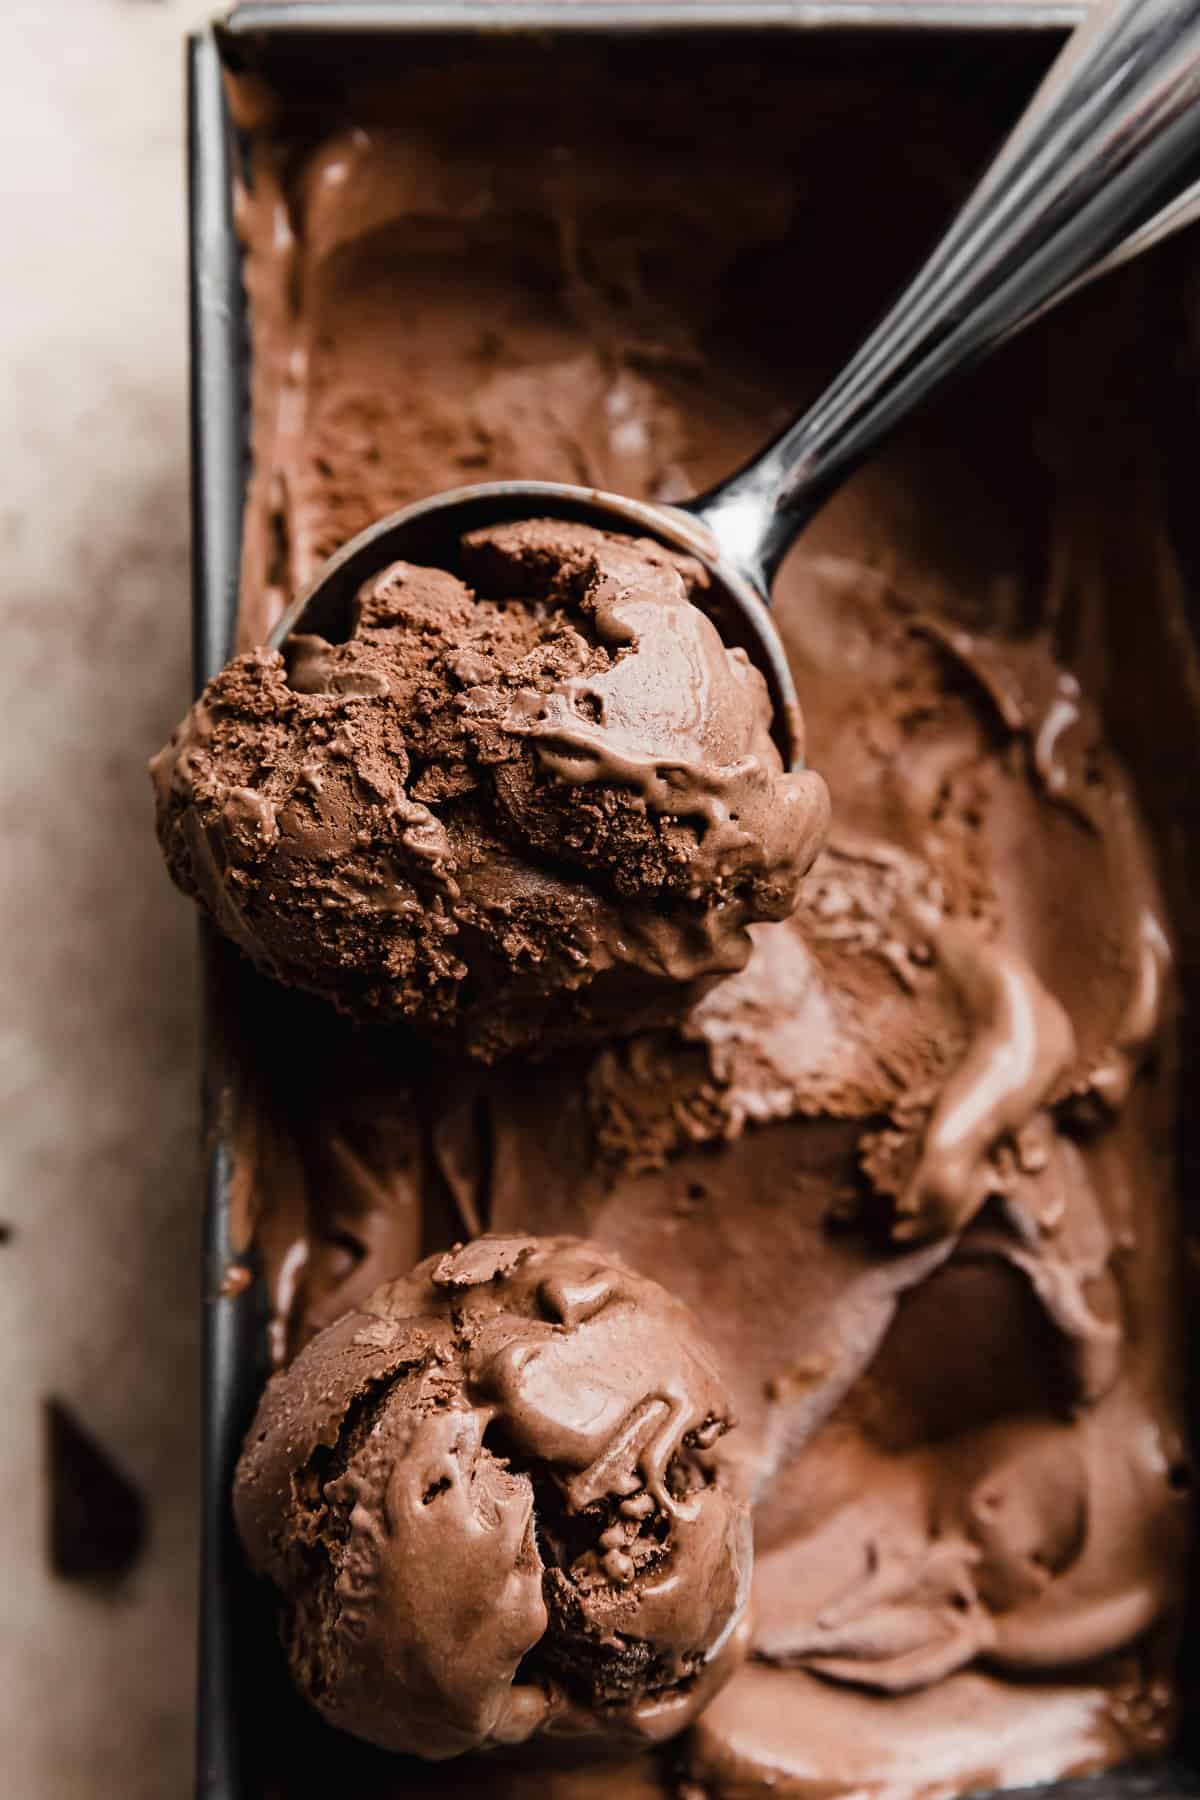 An ice cream scooper scooping out dark chocolate ice cream from a rectangle container.